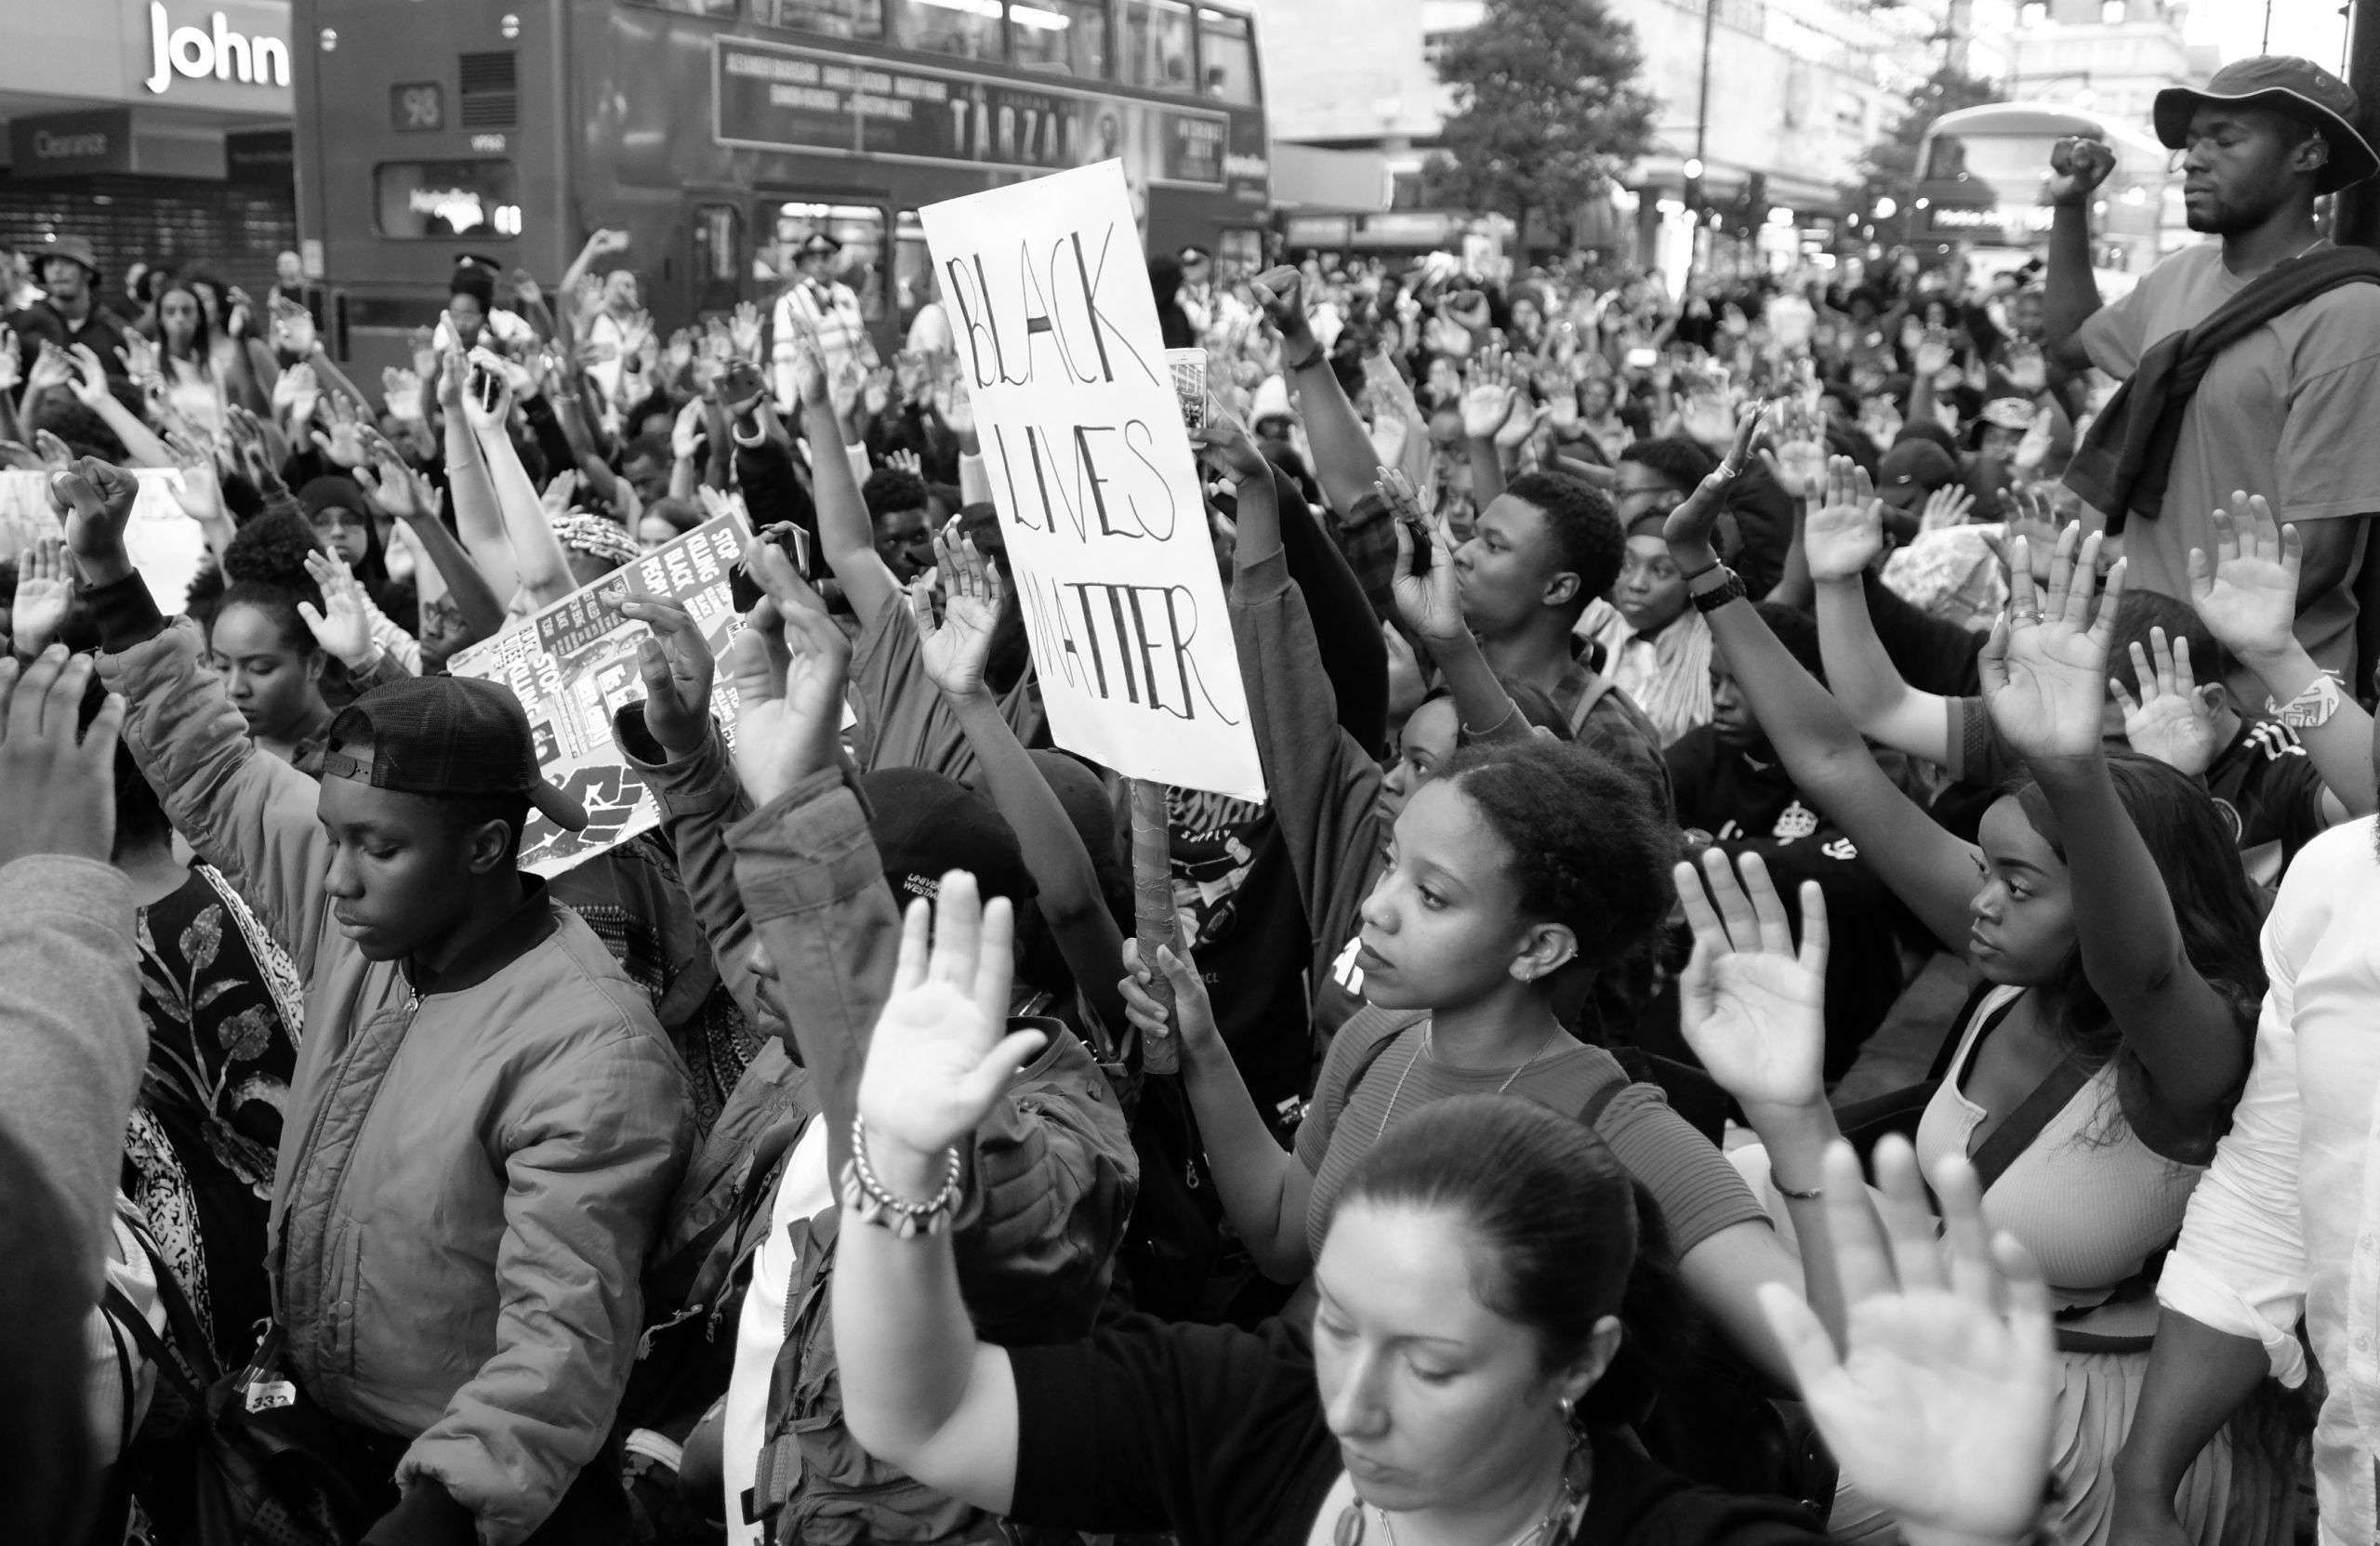 Protest for racial justice. Photo by Alisdare Hickson from CreativeCommons.